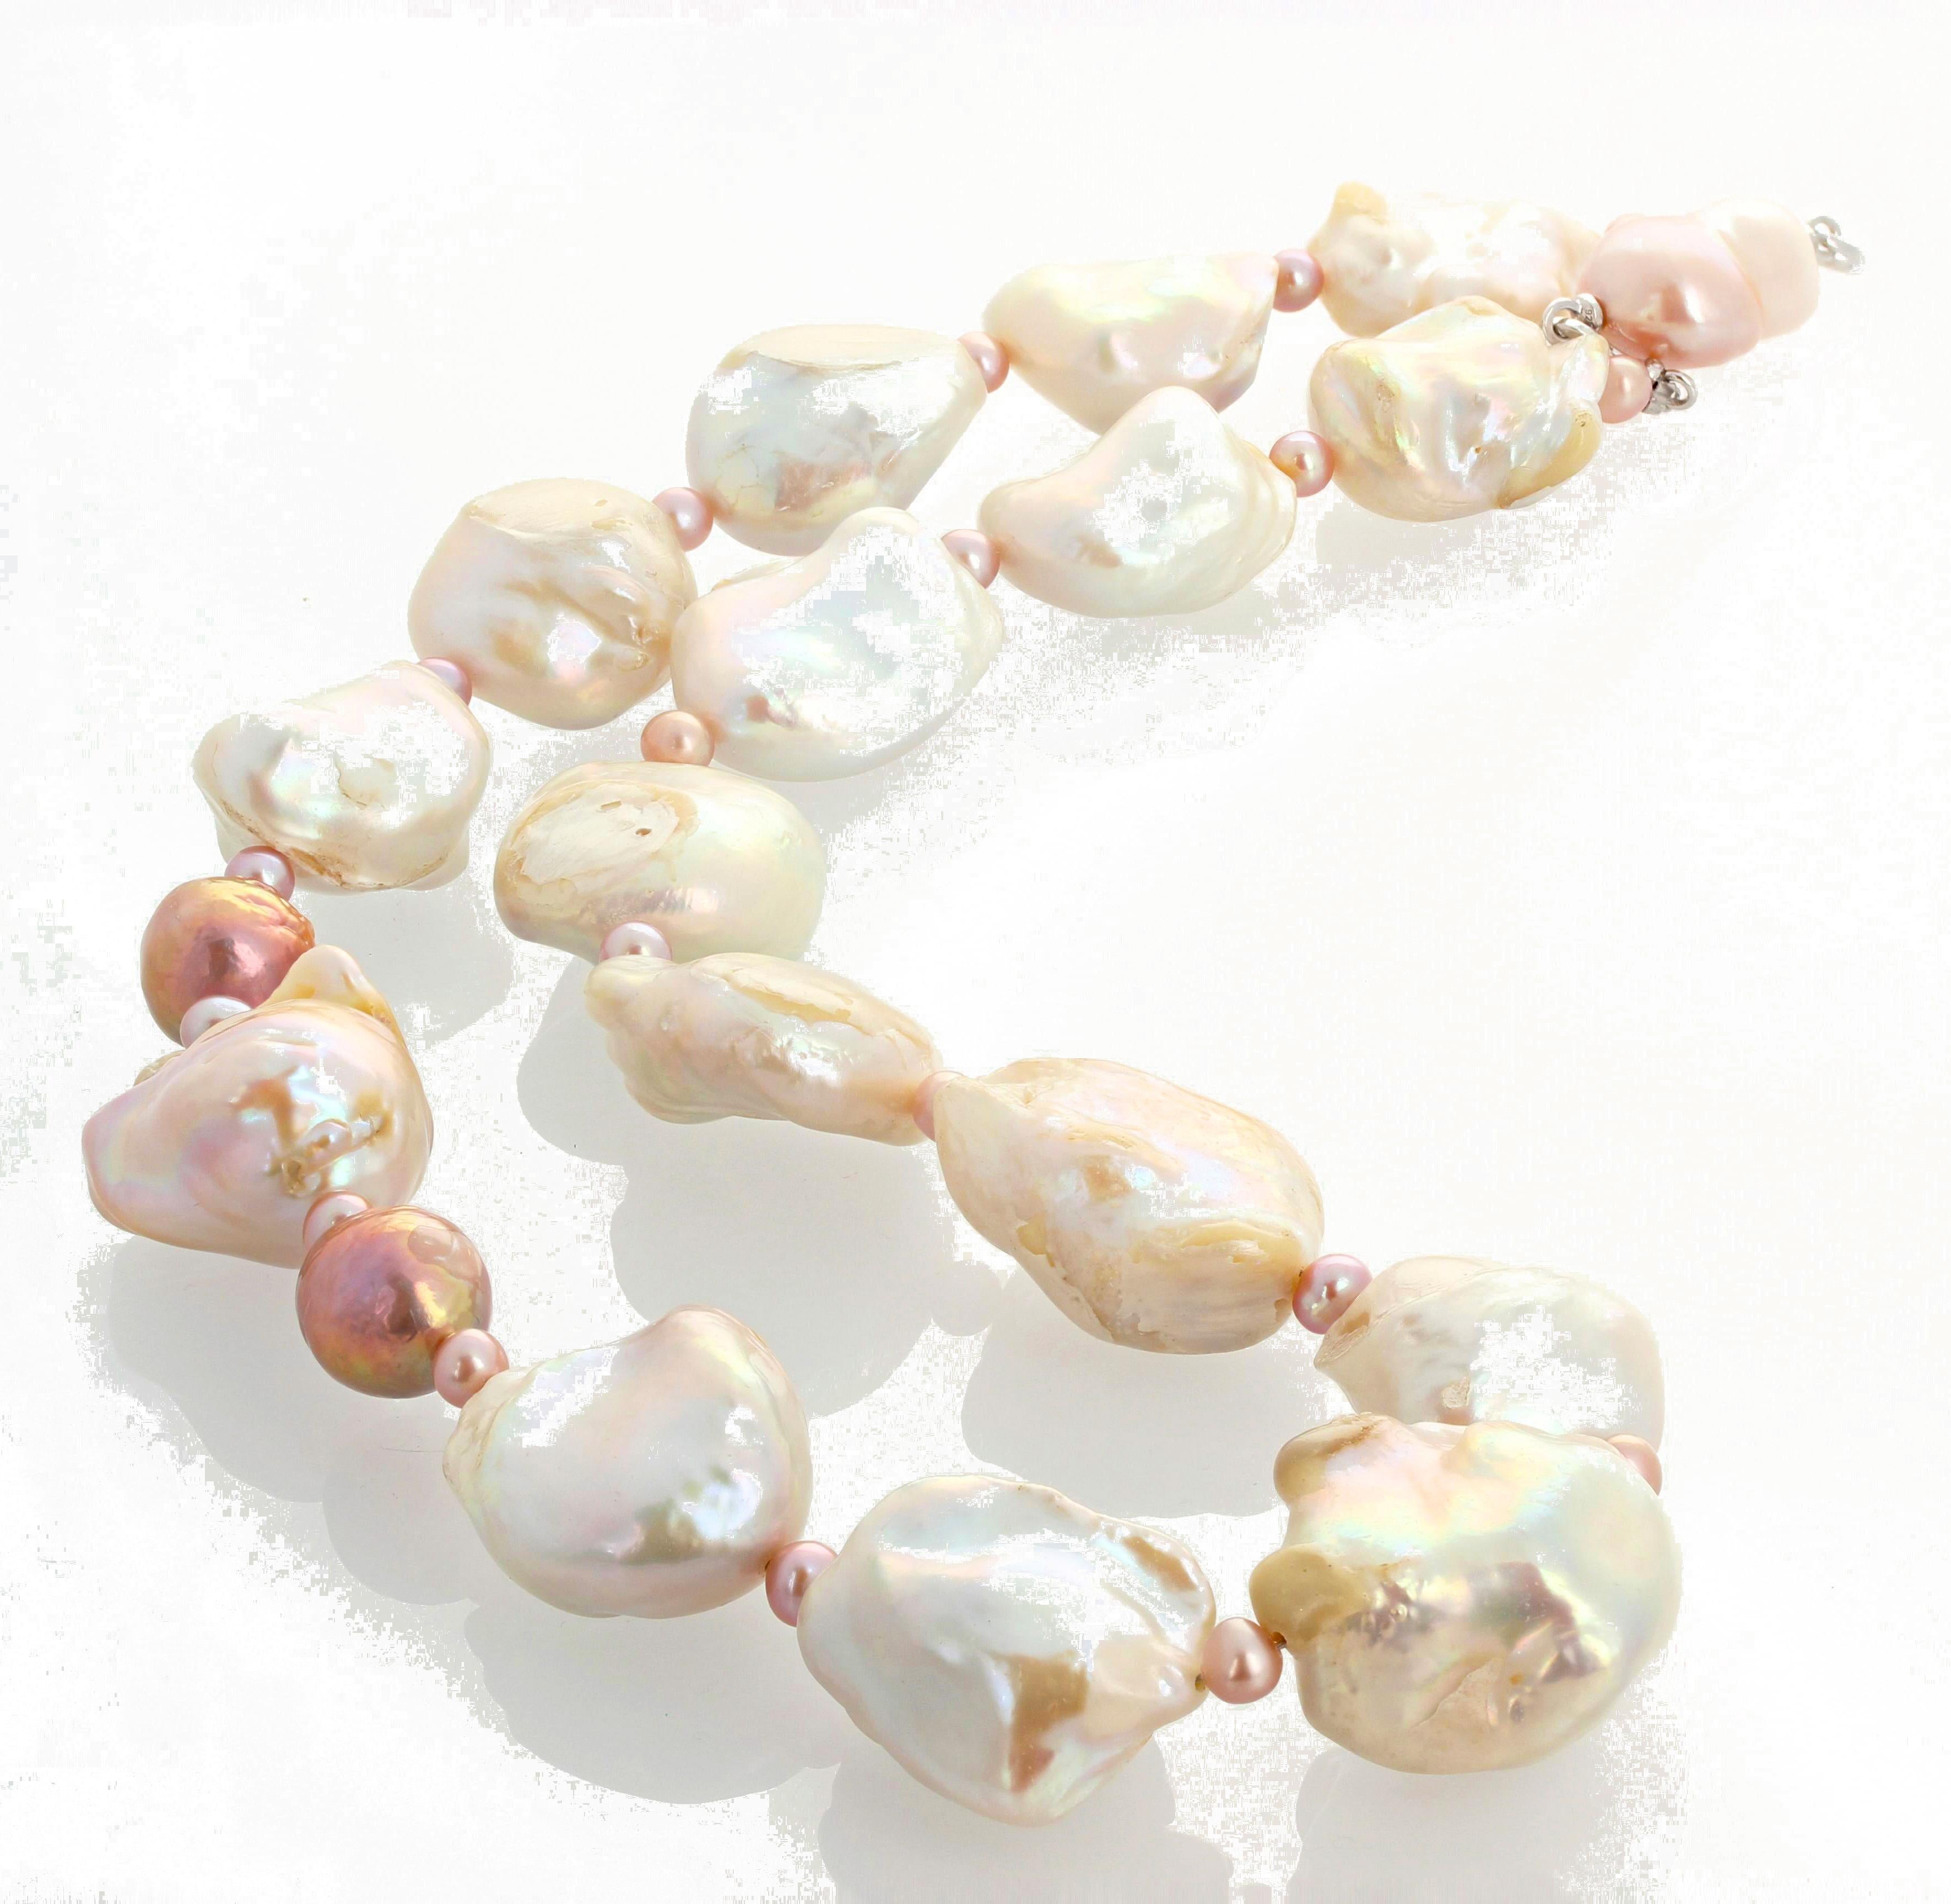 AJD Dramatic Cultured Glowing Baroque White Pearls & Pinkish Pearl 22